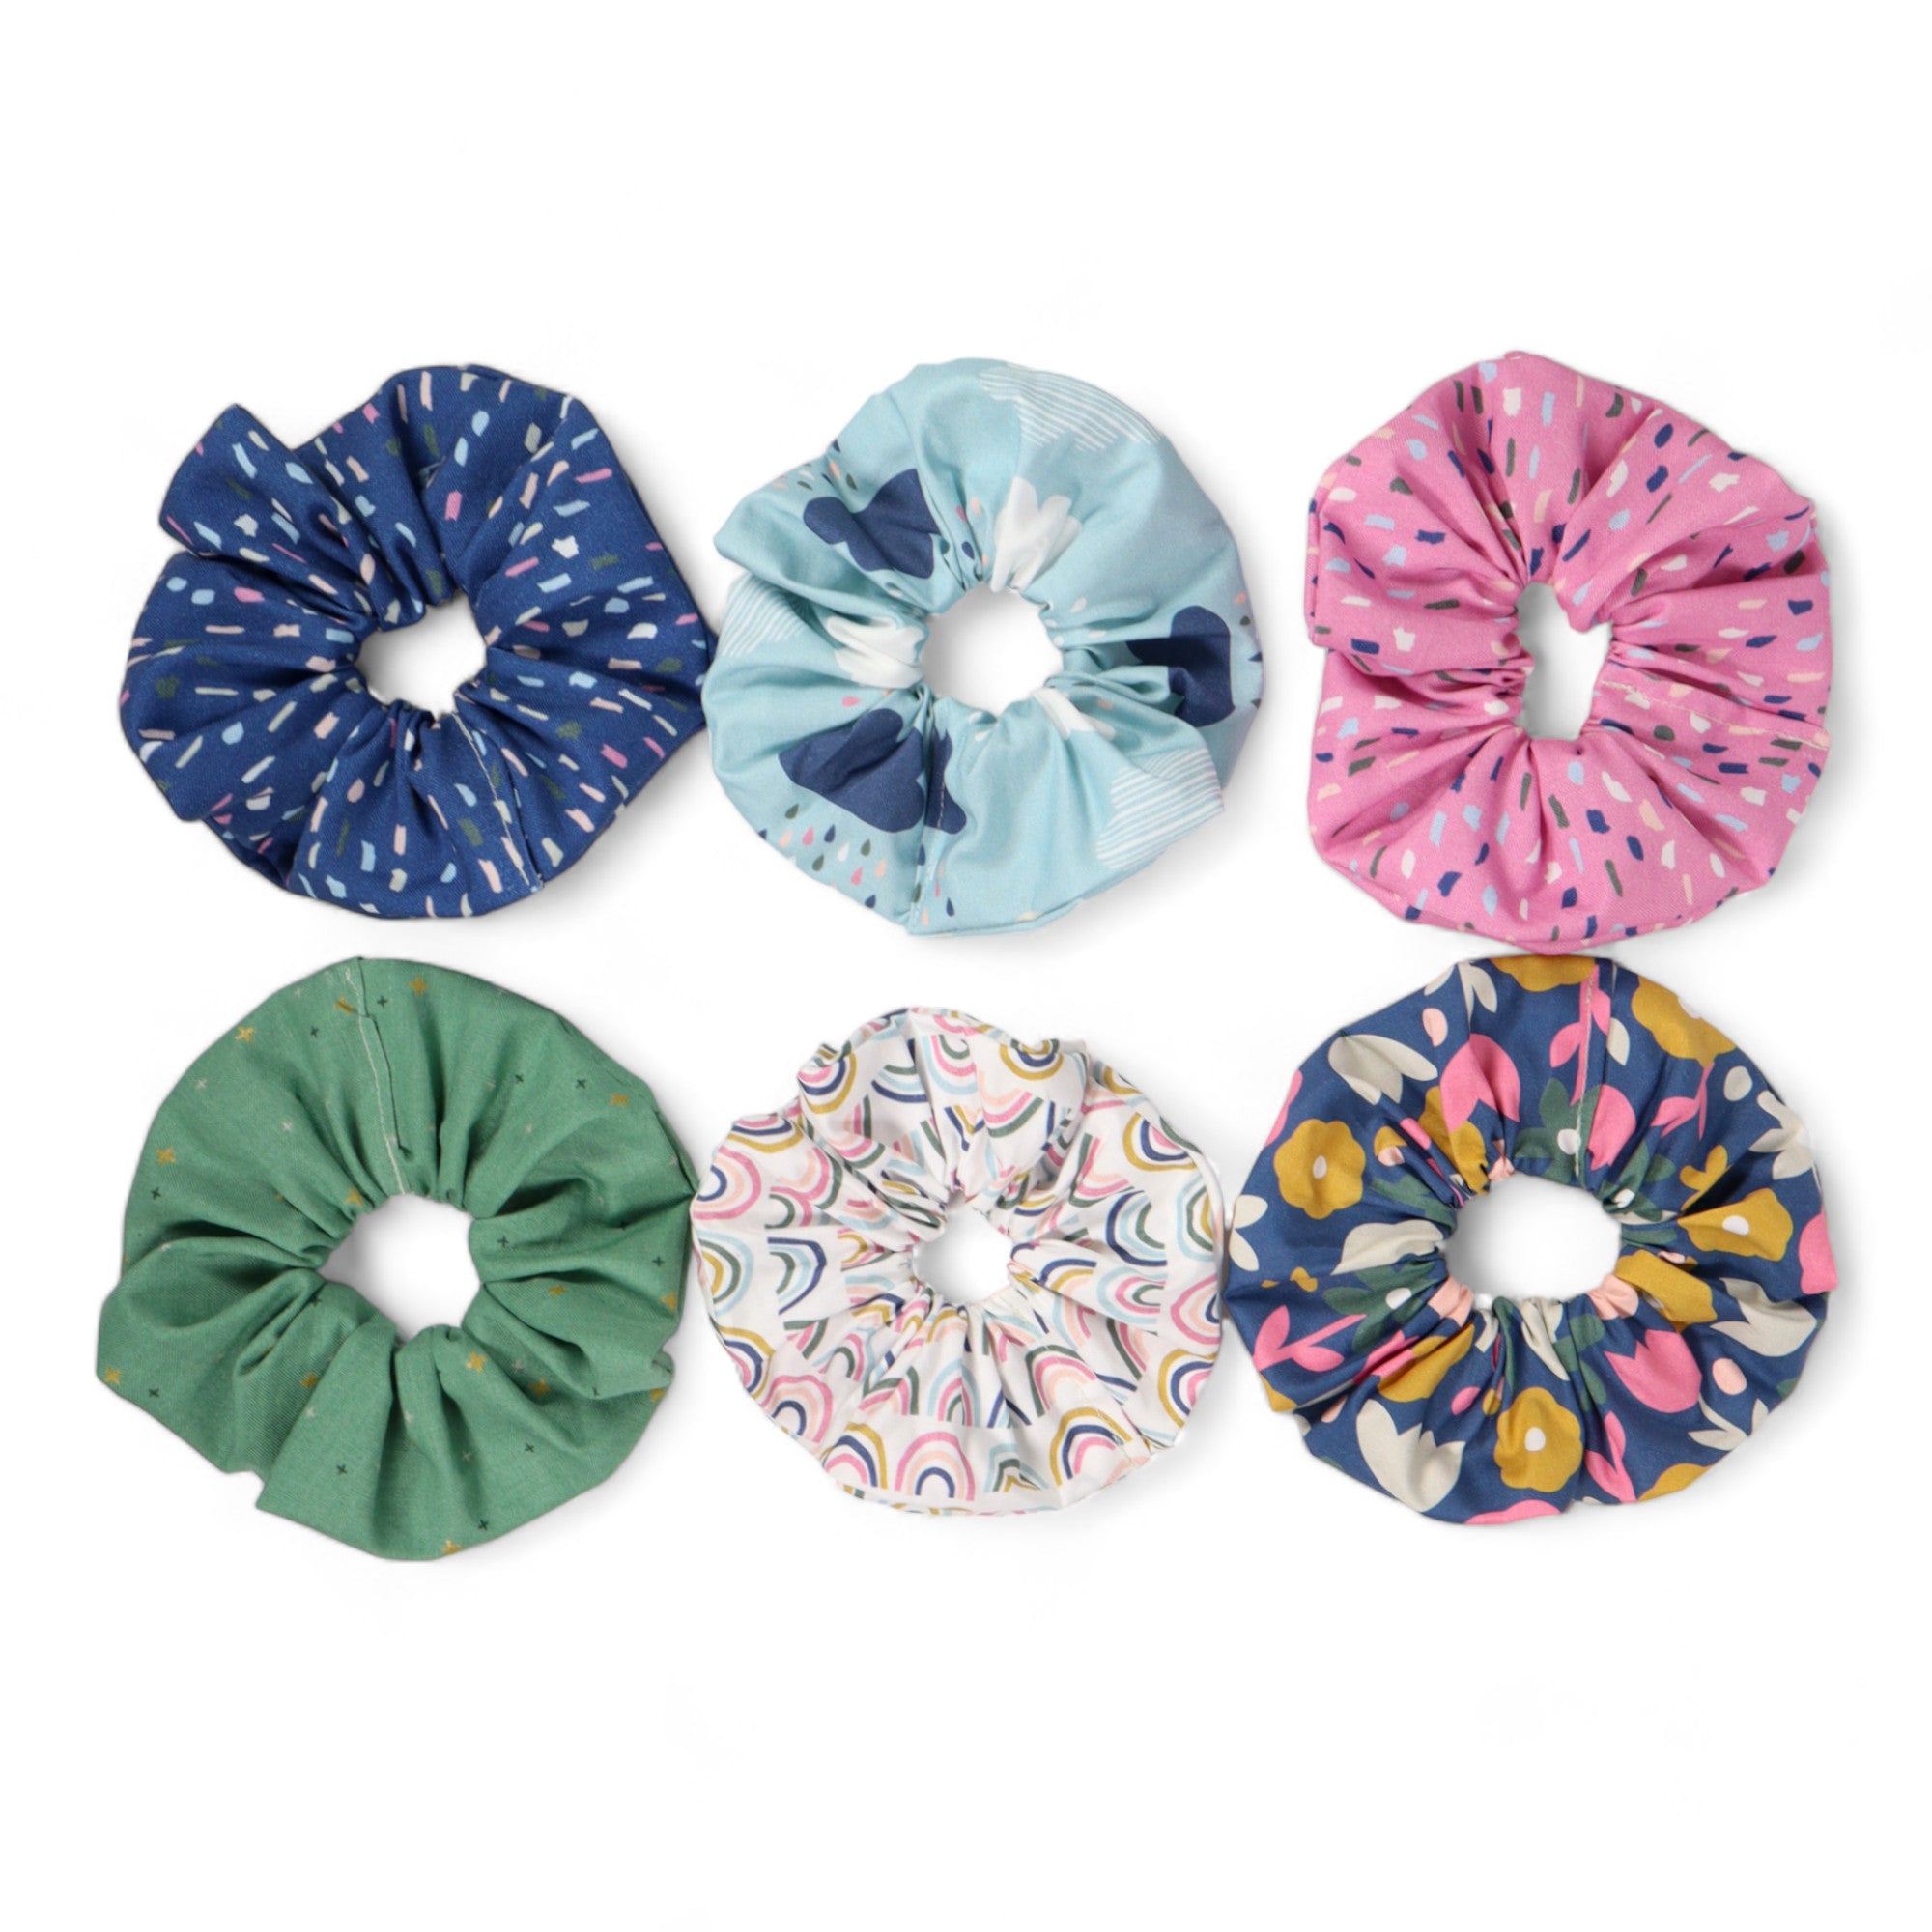 Crosscut Sewing Co. Scrunchie Sewing Kit - Rainbows